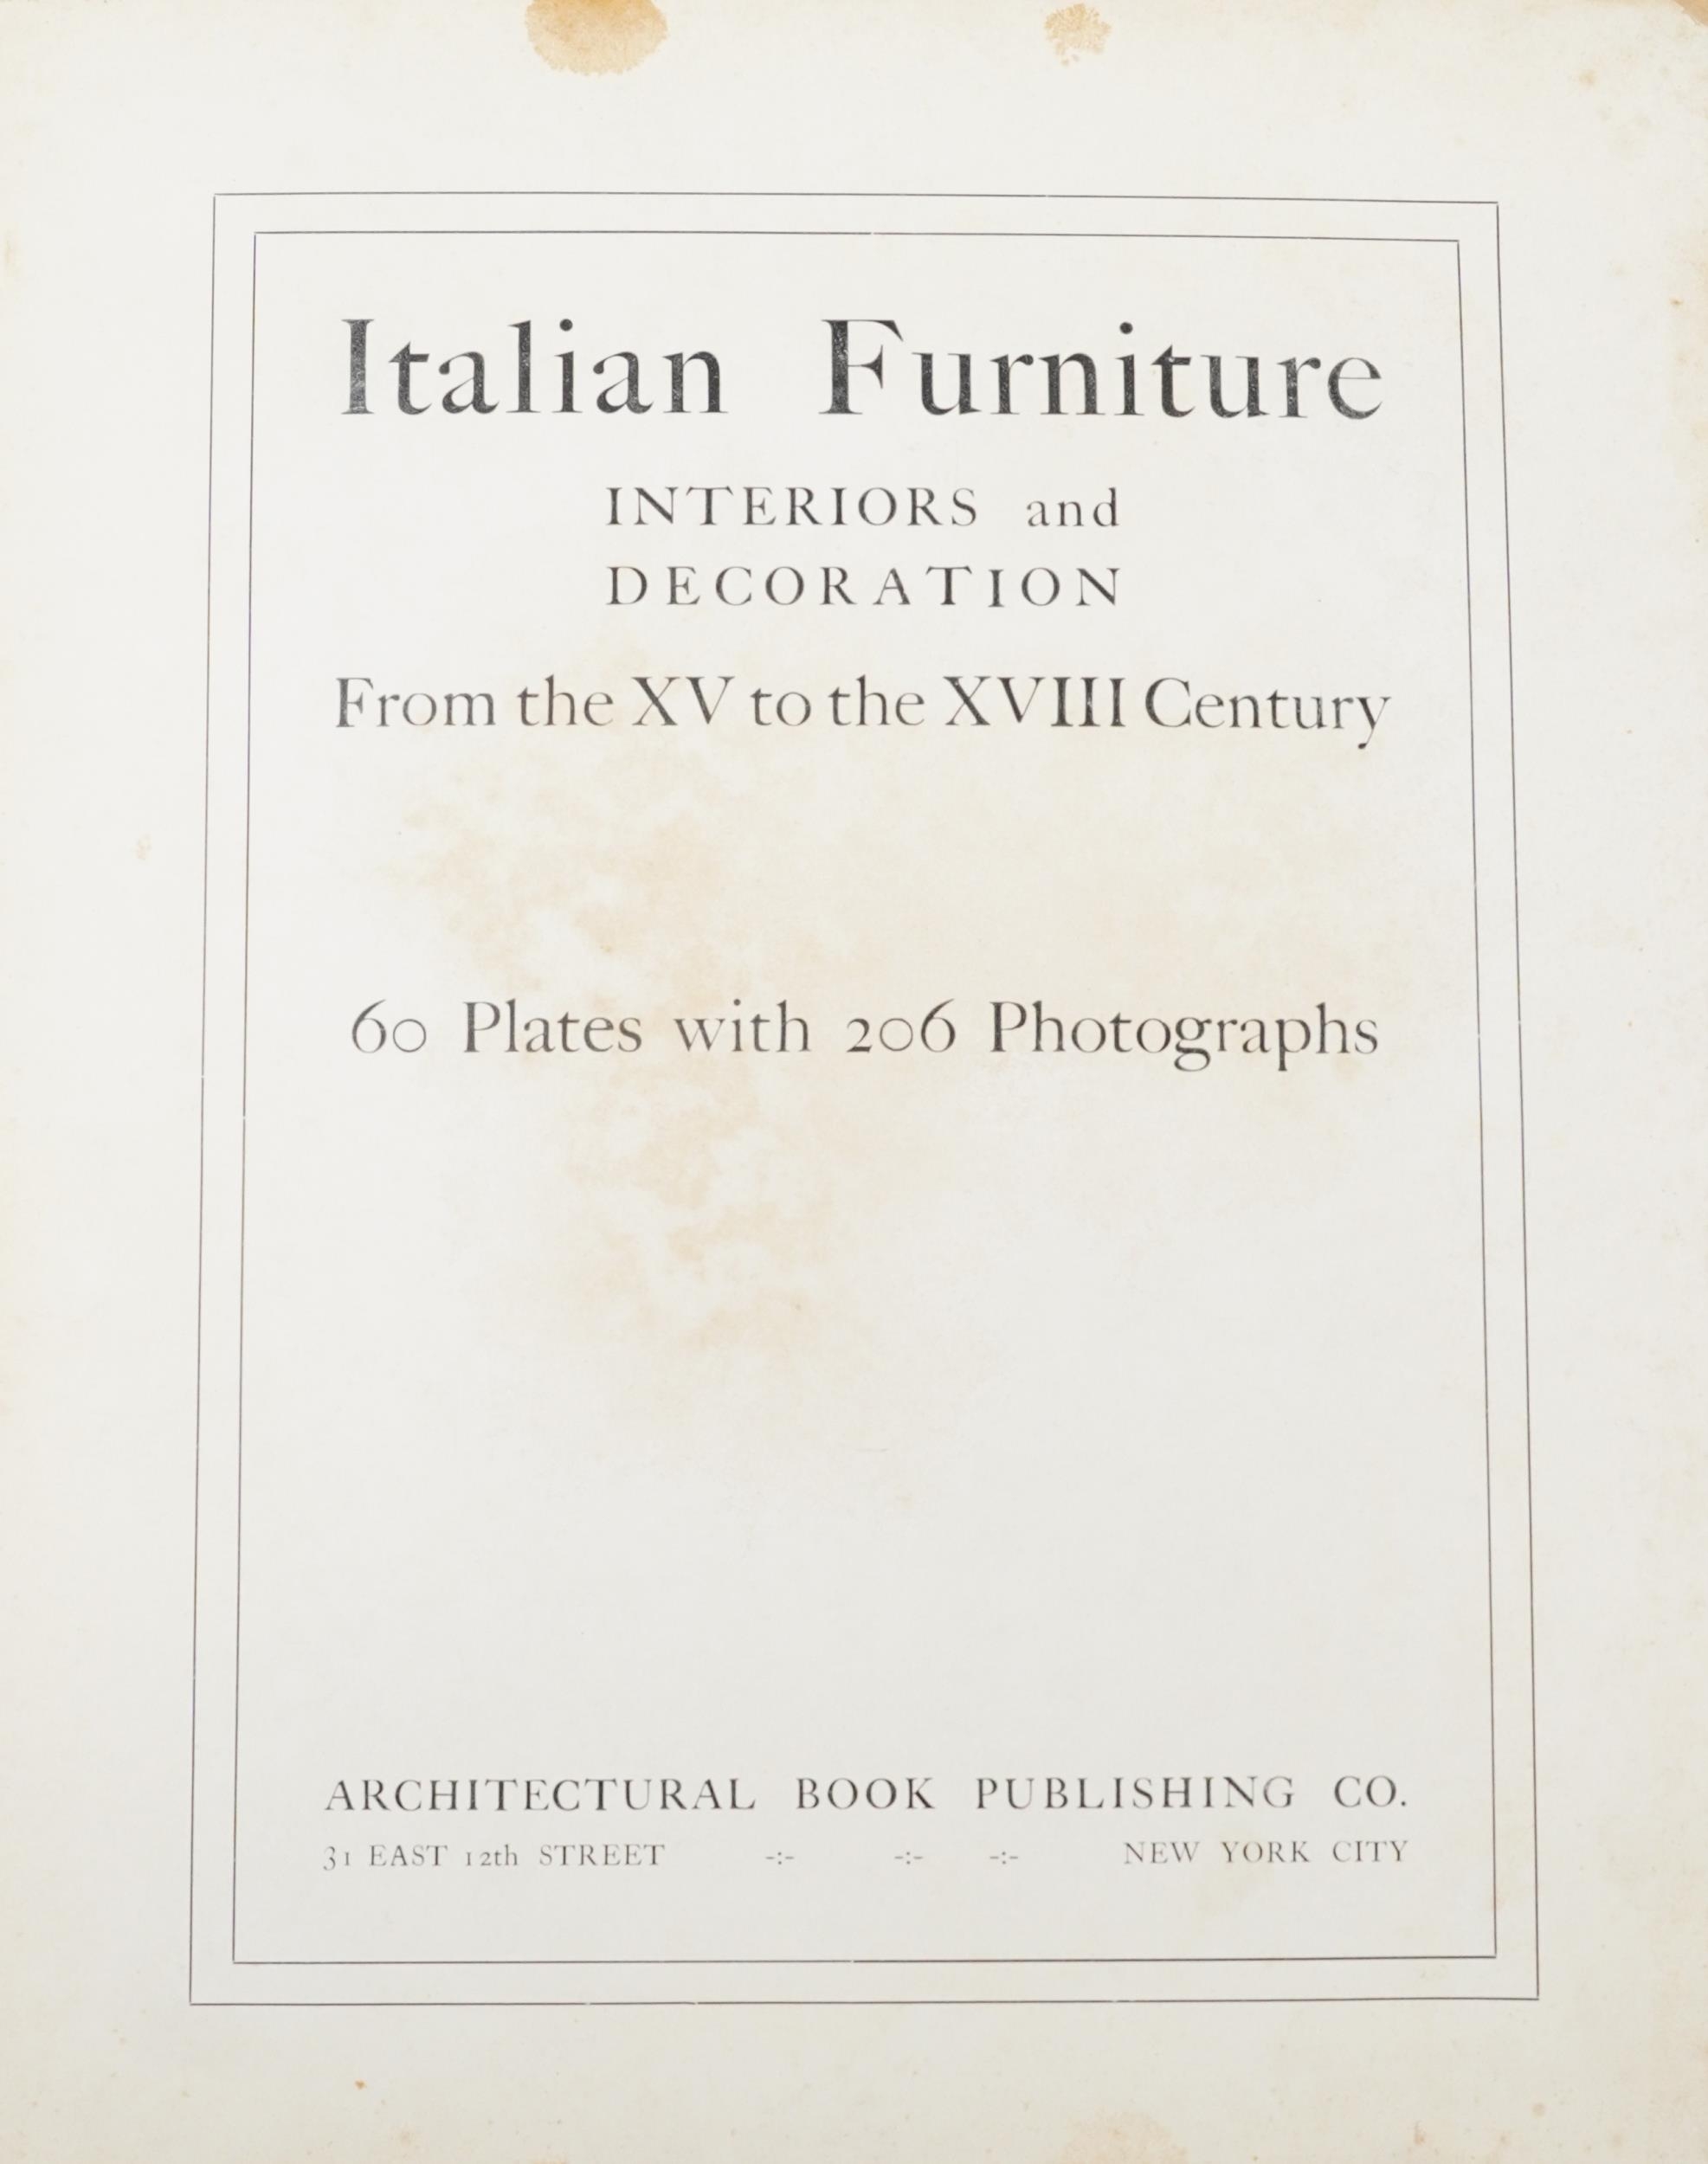 Italian Furniture, Interiors and Decoration from the 15th to the 18th century hardback folio with - Image 2 of 3